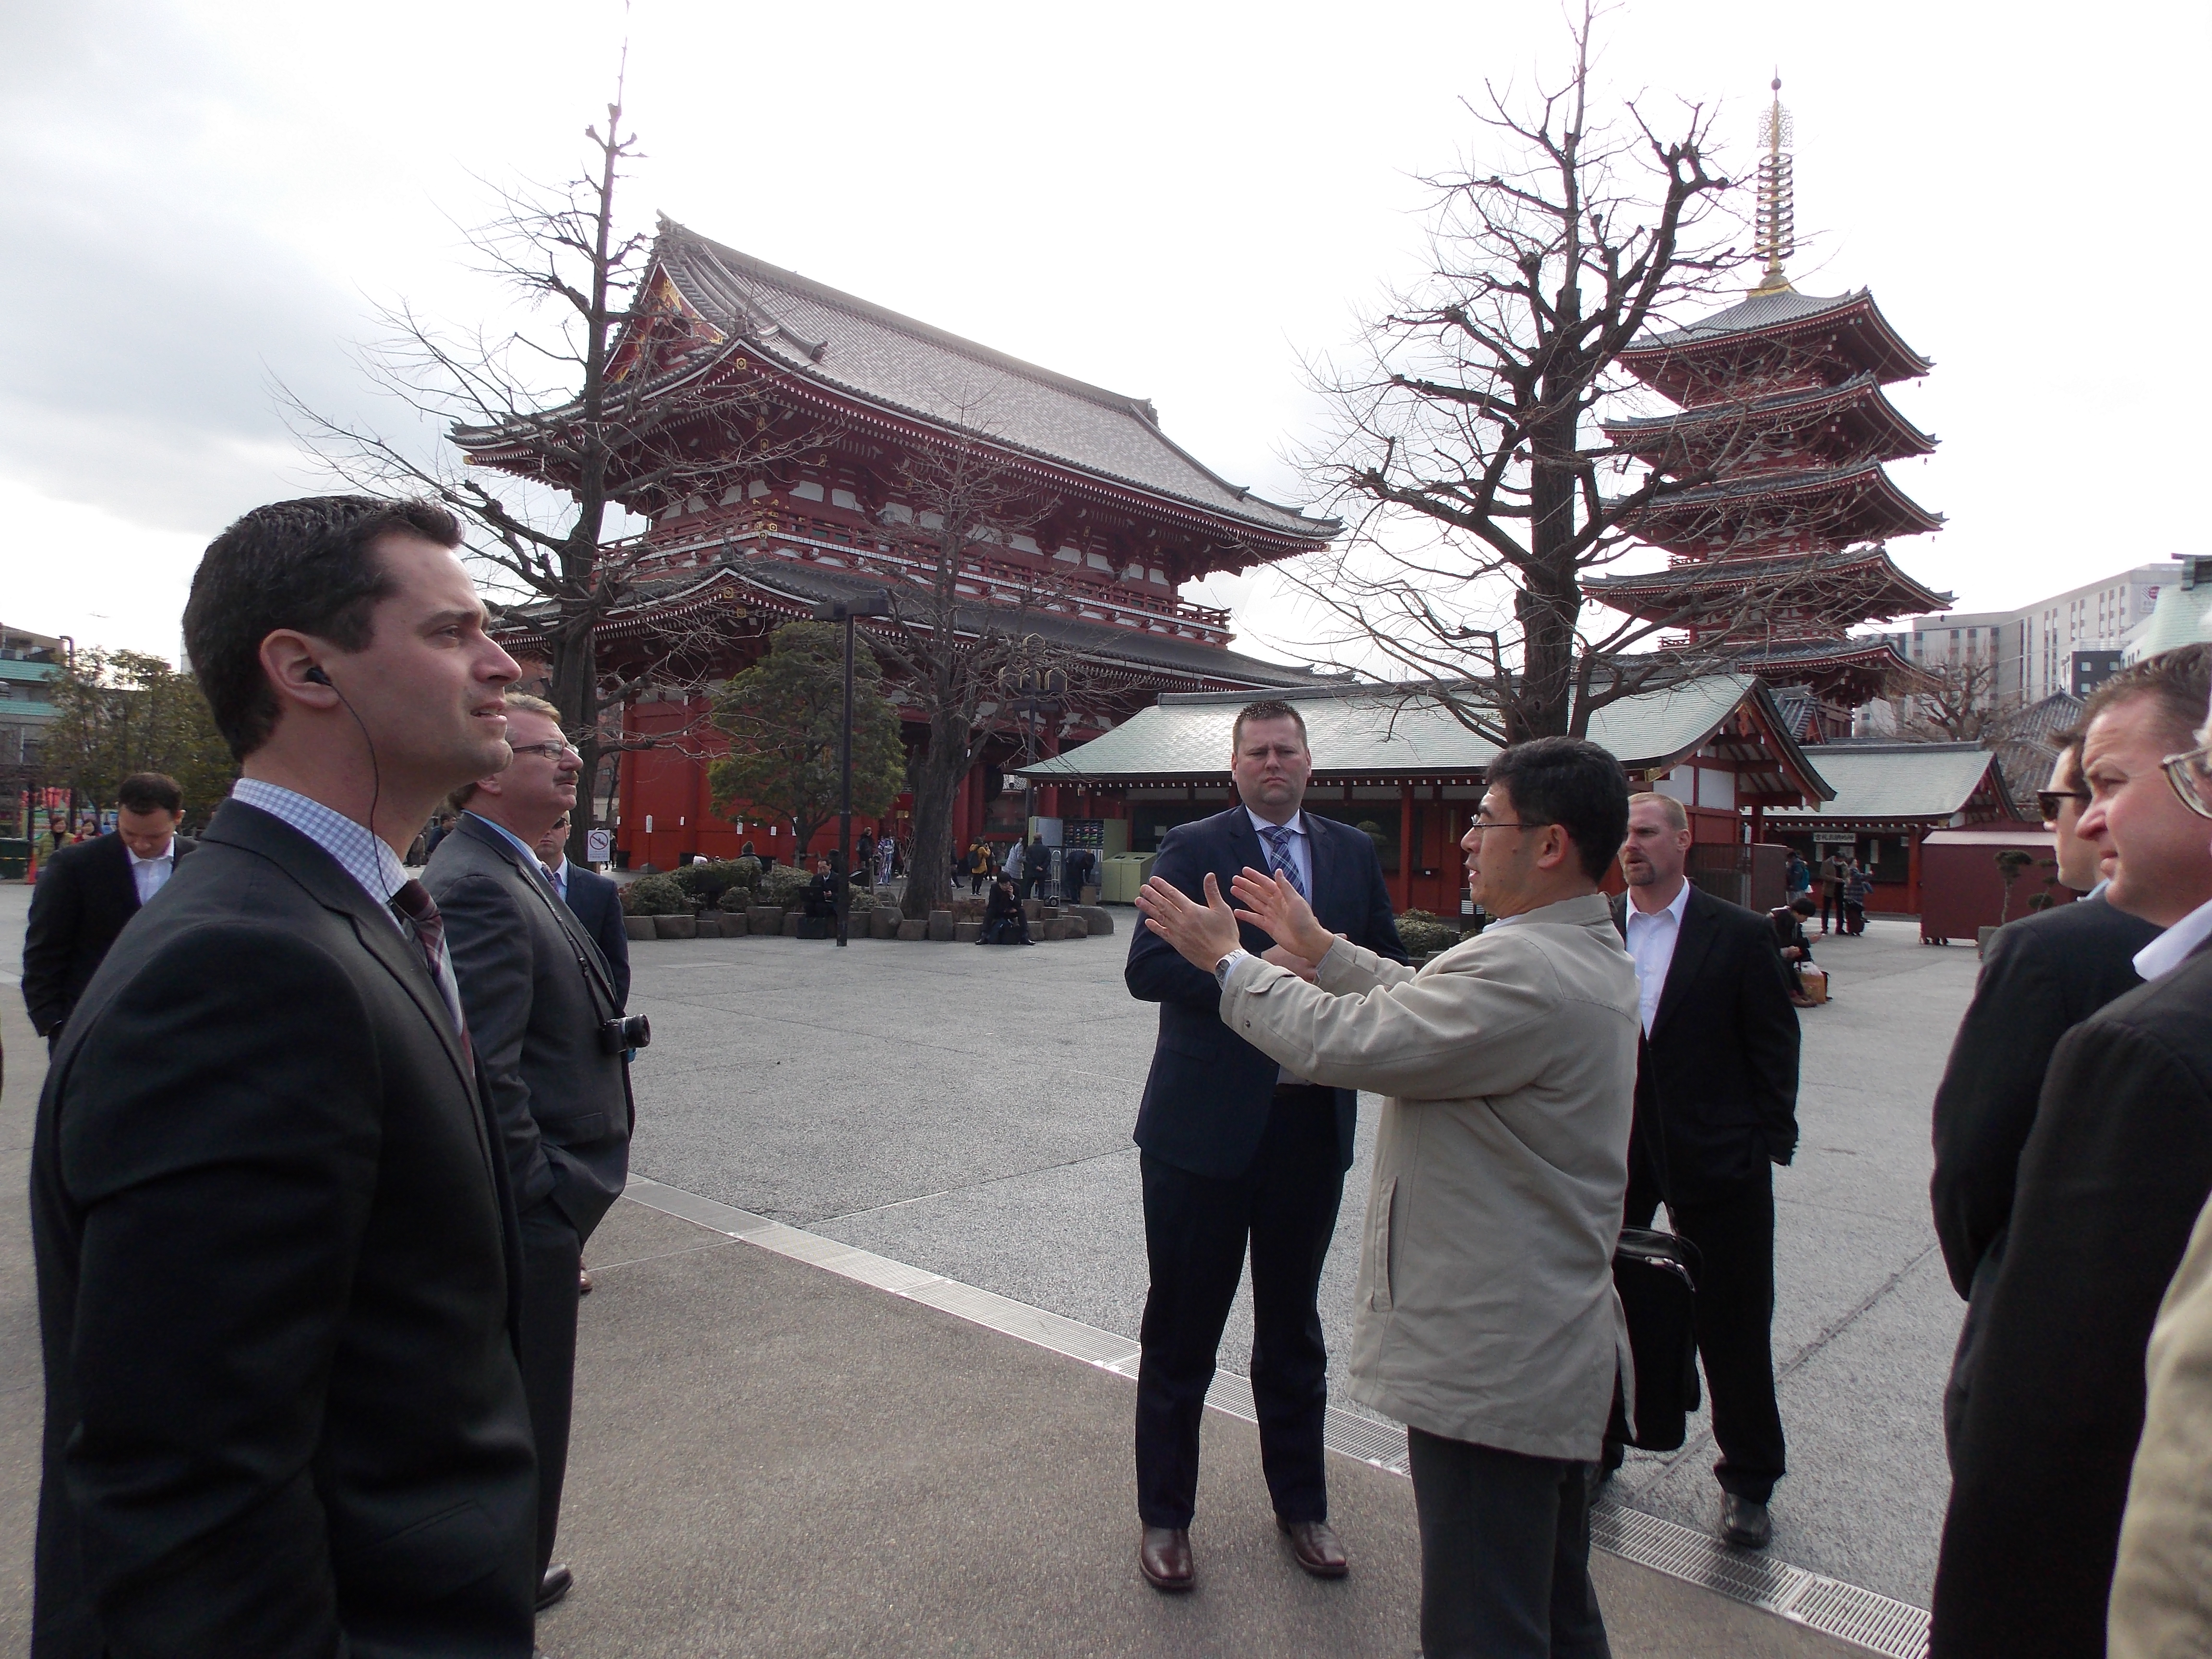 Katsumi Niwa-san, the English-speaking guide who has been with us all week, explains the customs and history of the Buddhist Sensoji Temple.